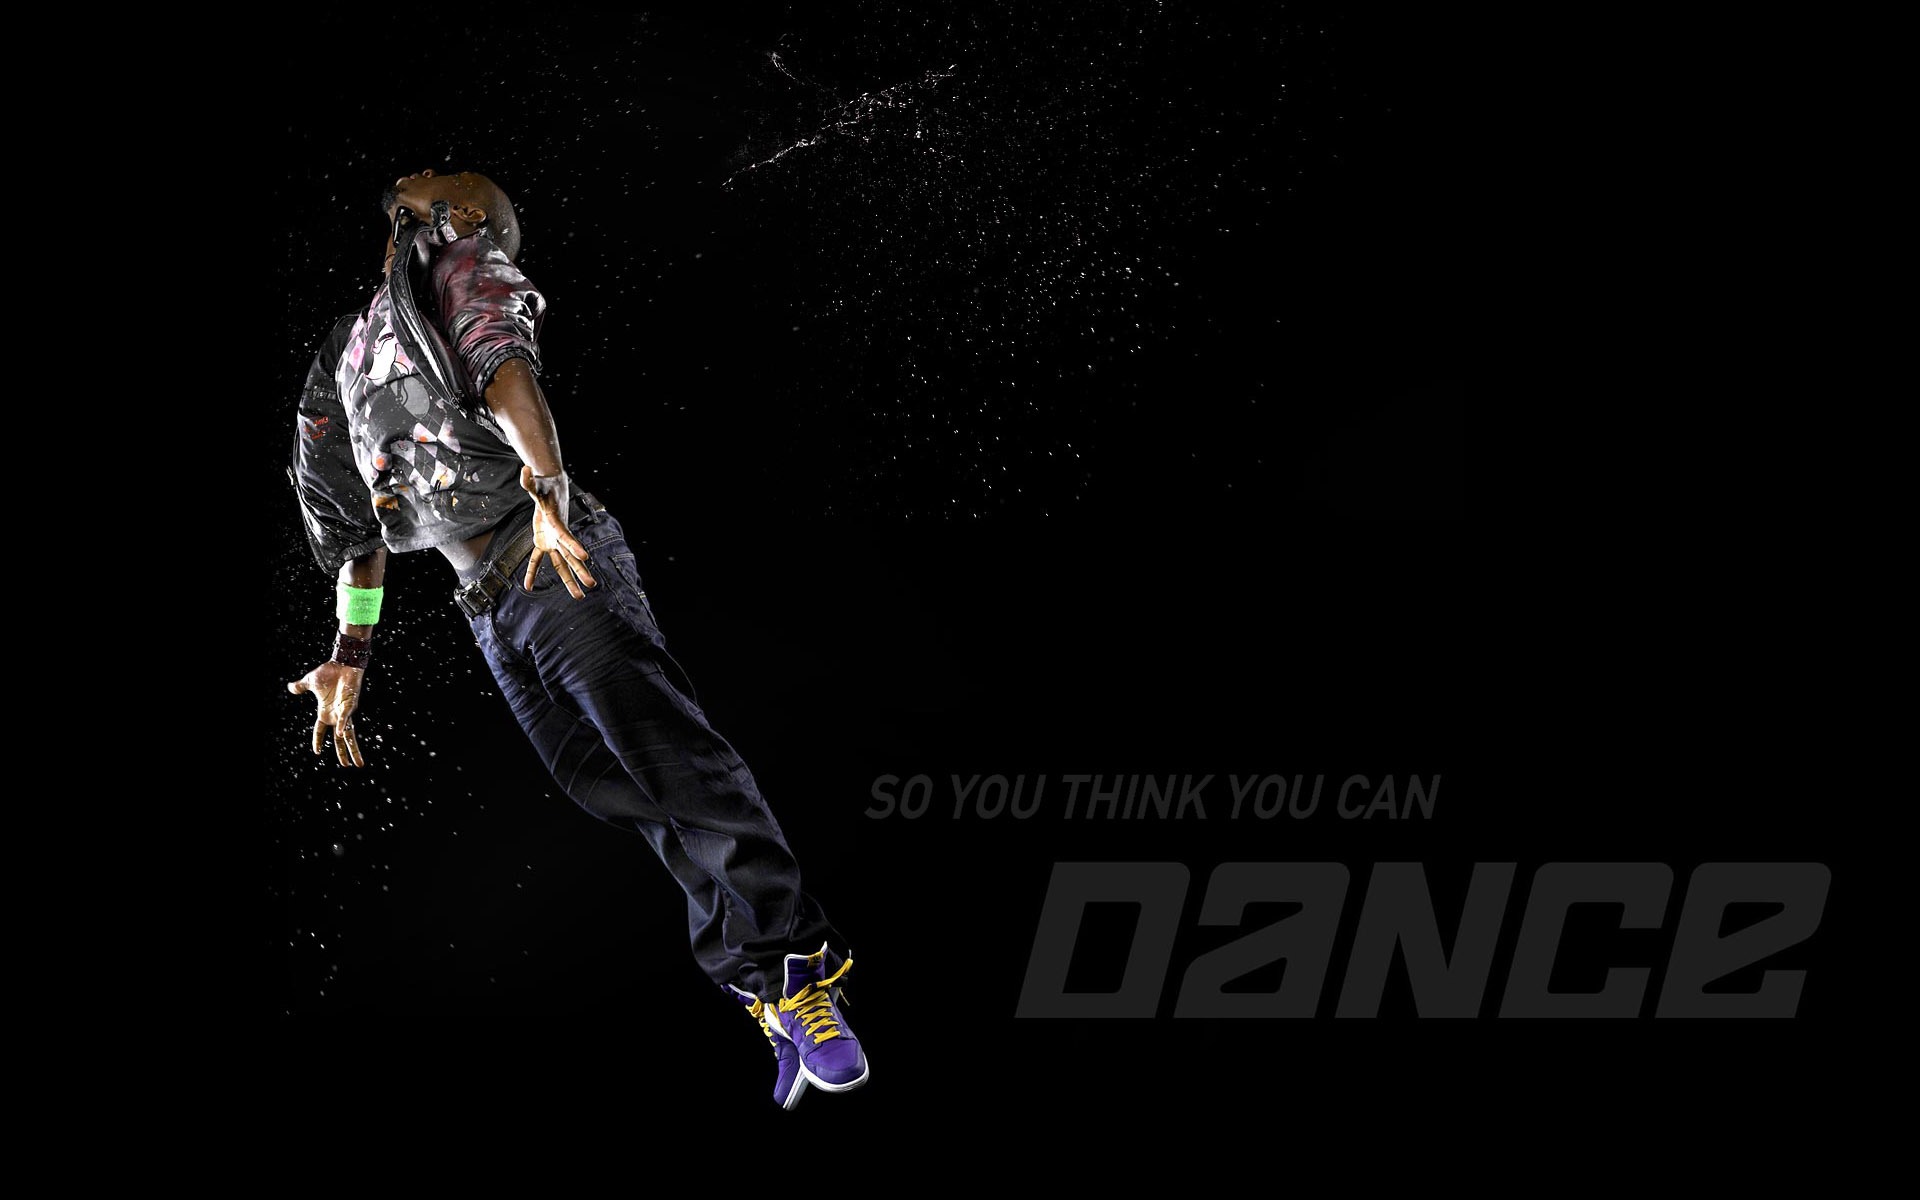 So You Think You Can Dance 舞林争霸 壁纸(一)10 - 1920x1200